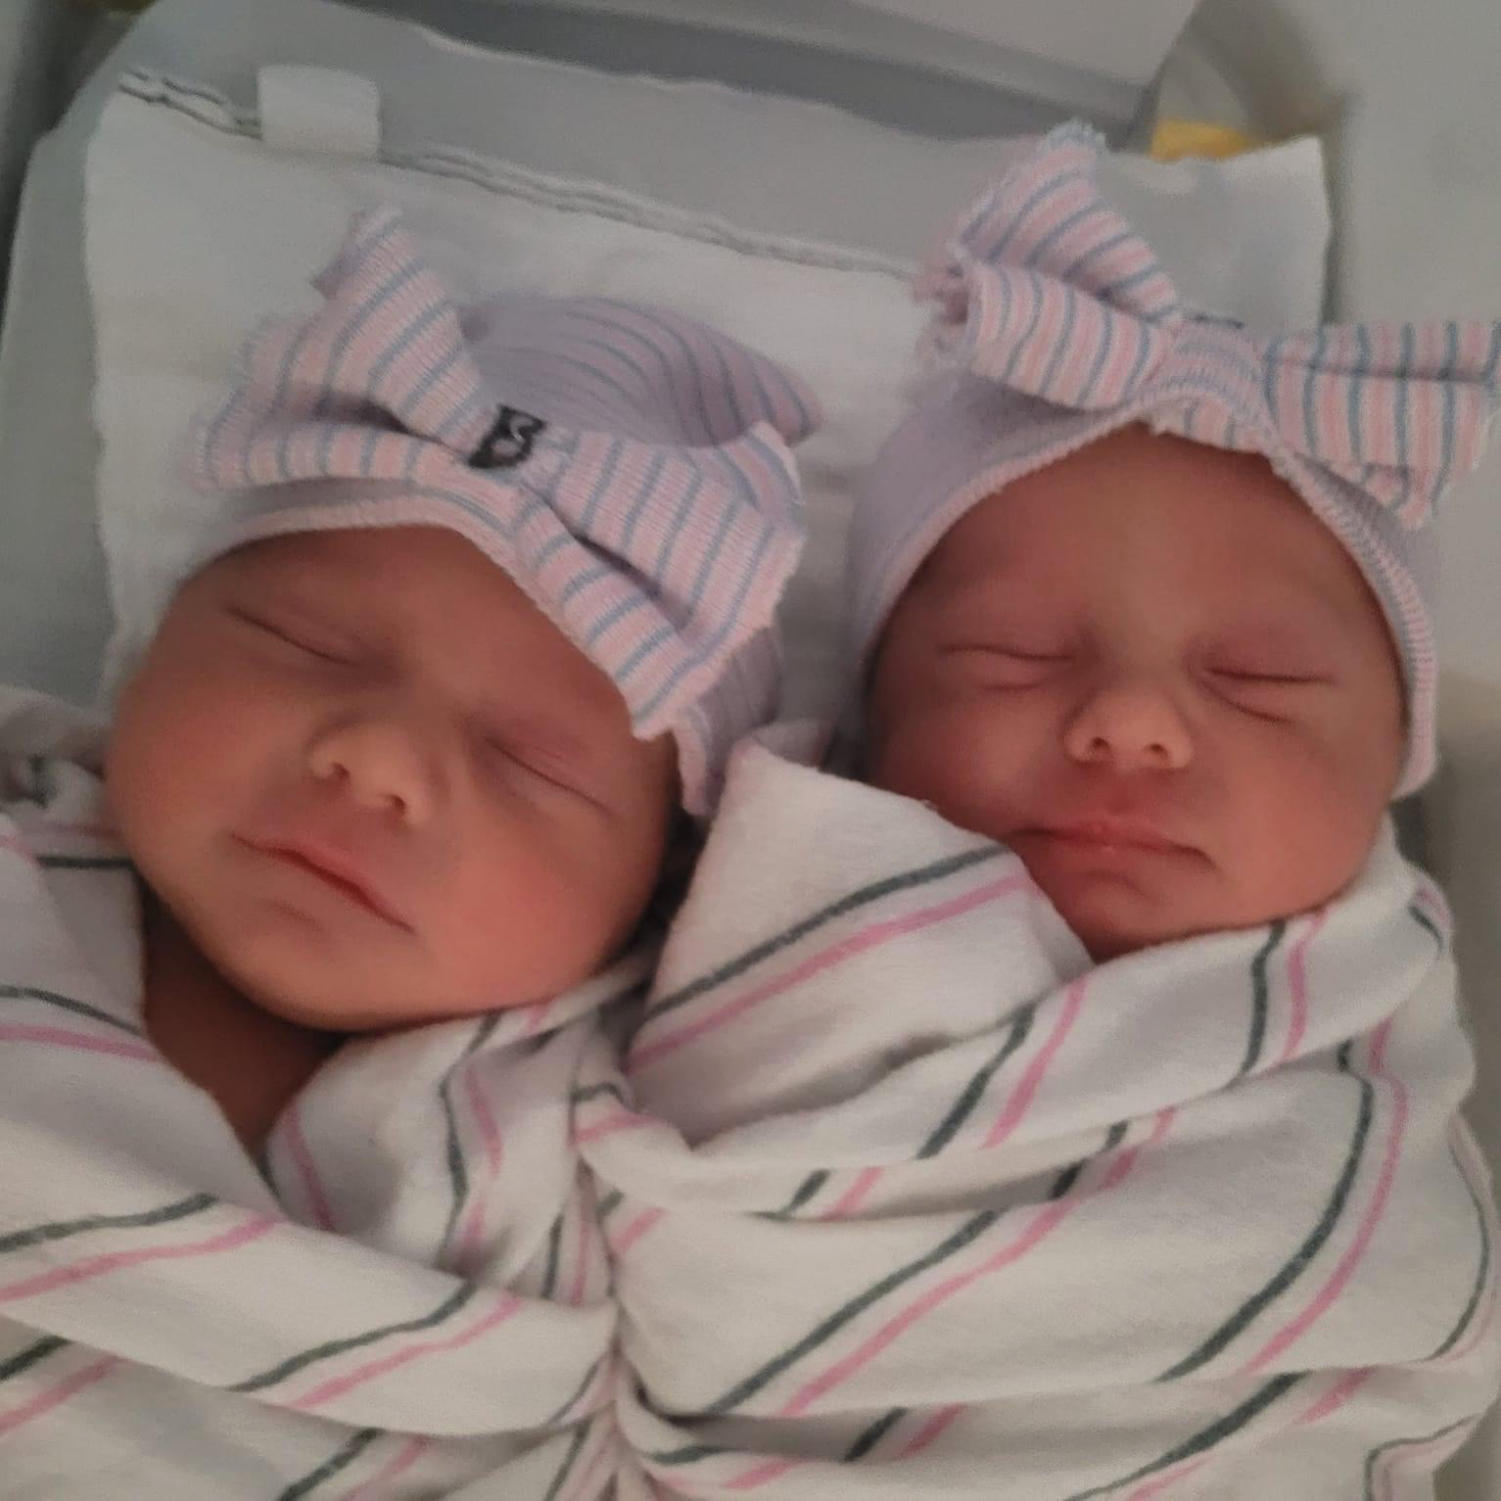 Harkness’s twins smile
for a photo together
shortly after being born. The girls were born on March 2.